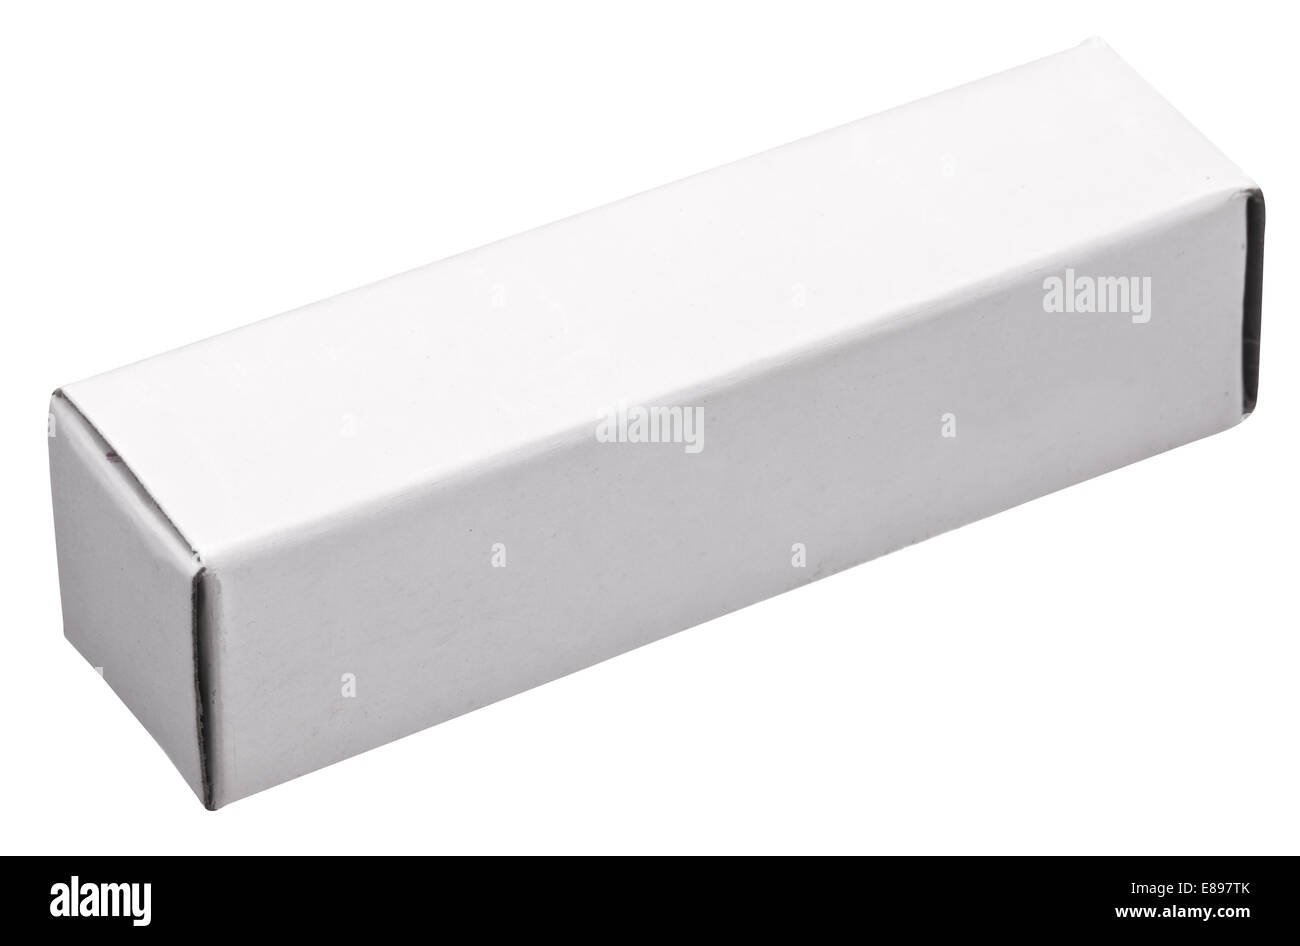 Long white paper box. File contains clipping paths. Stock Photo